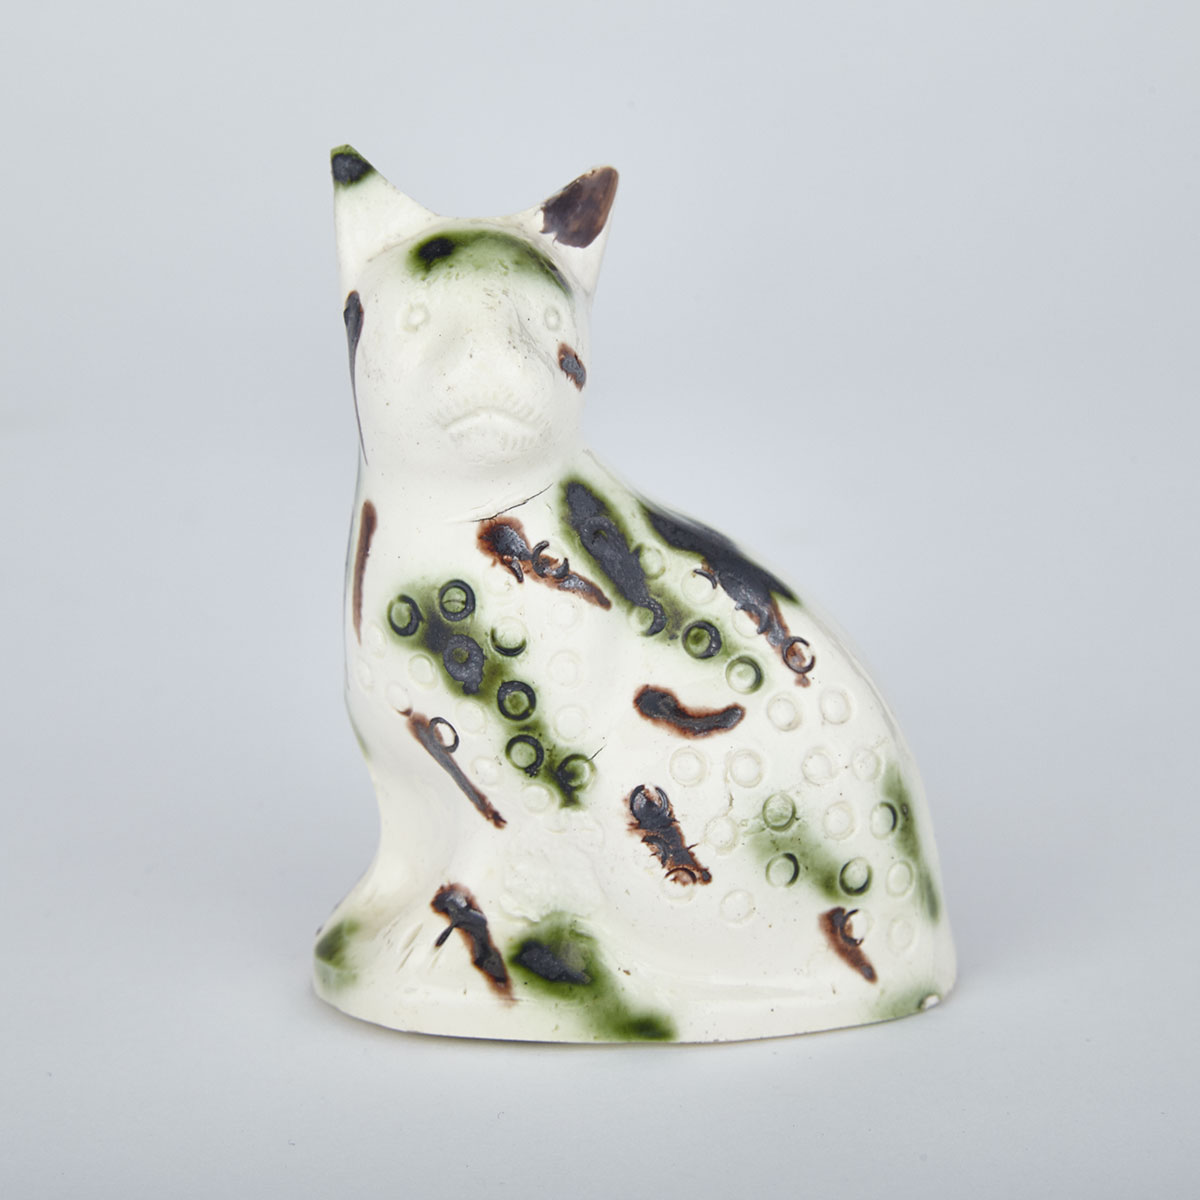 Staffordshire Creamware Model of a Seated Cat, c.1770-80